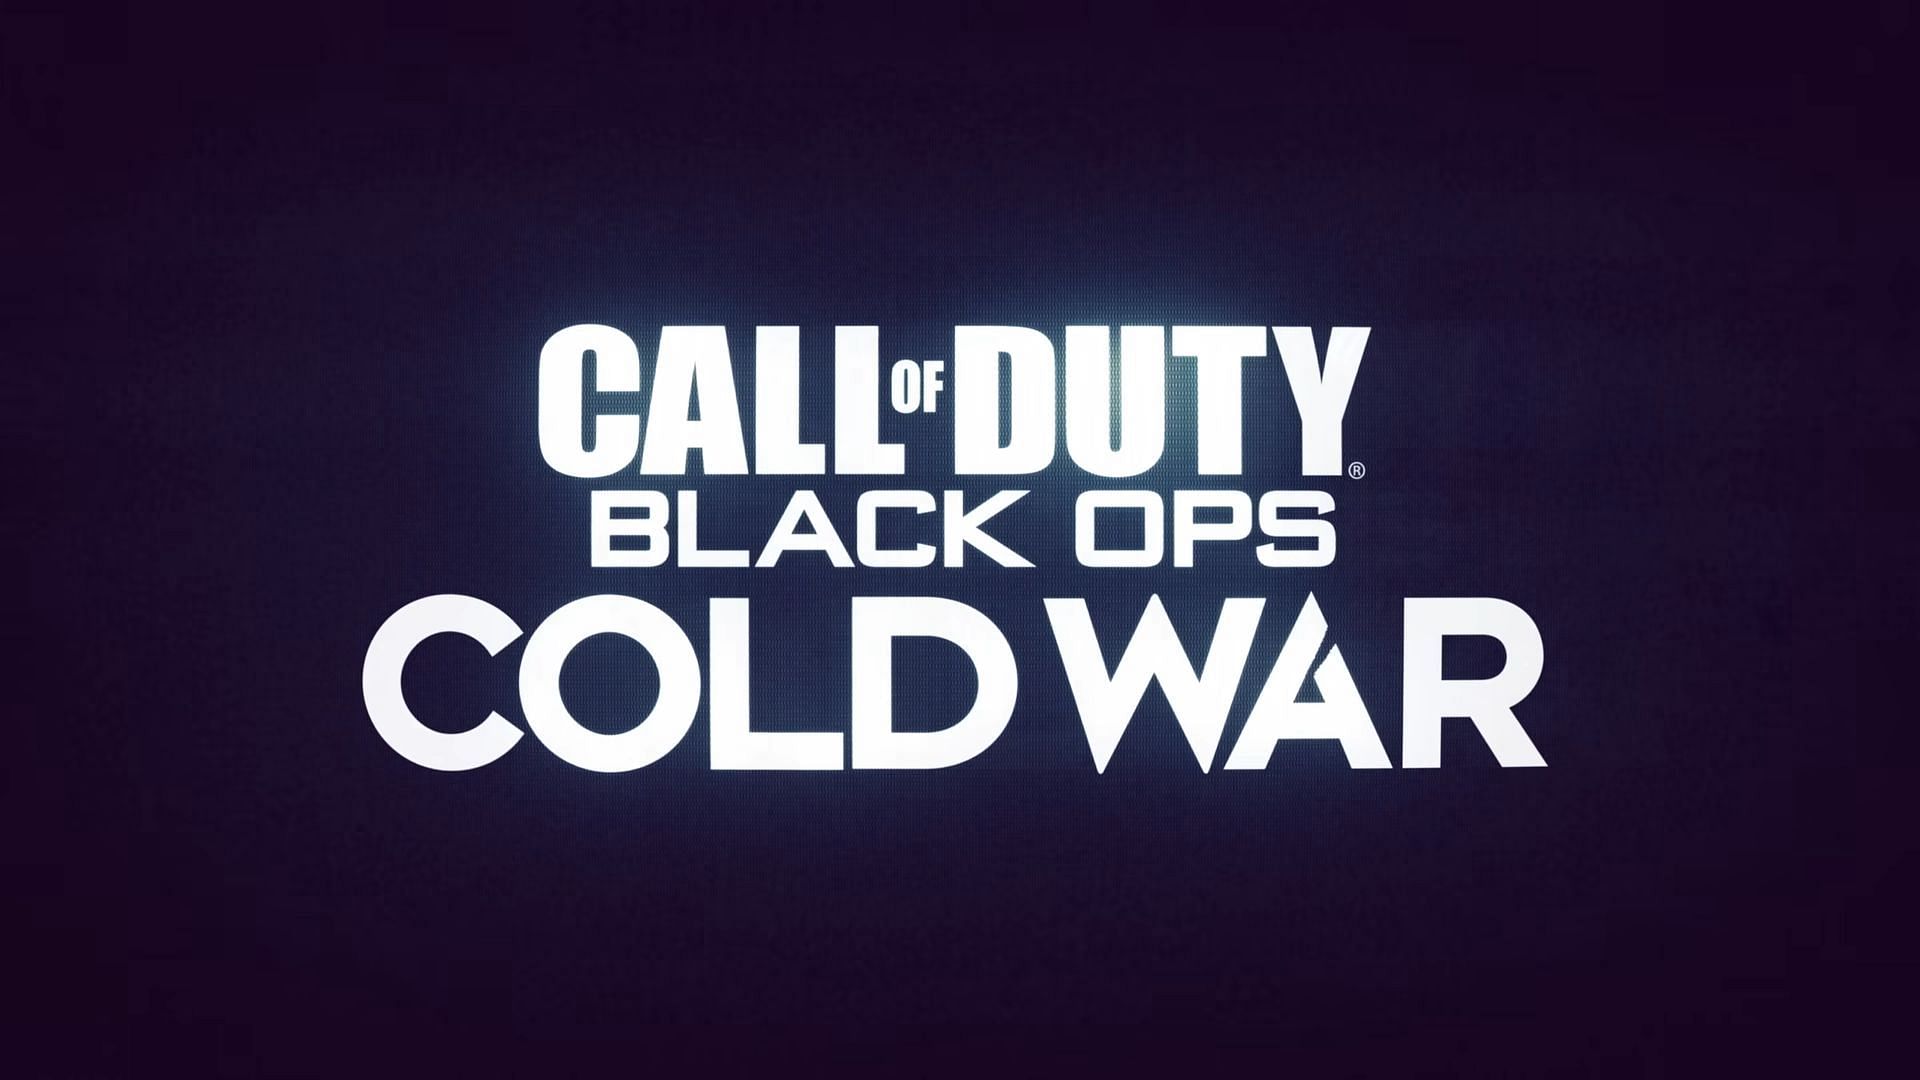 Call of Duty: Black Ops Cold War (Image via Activision)